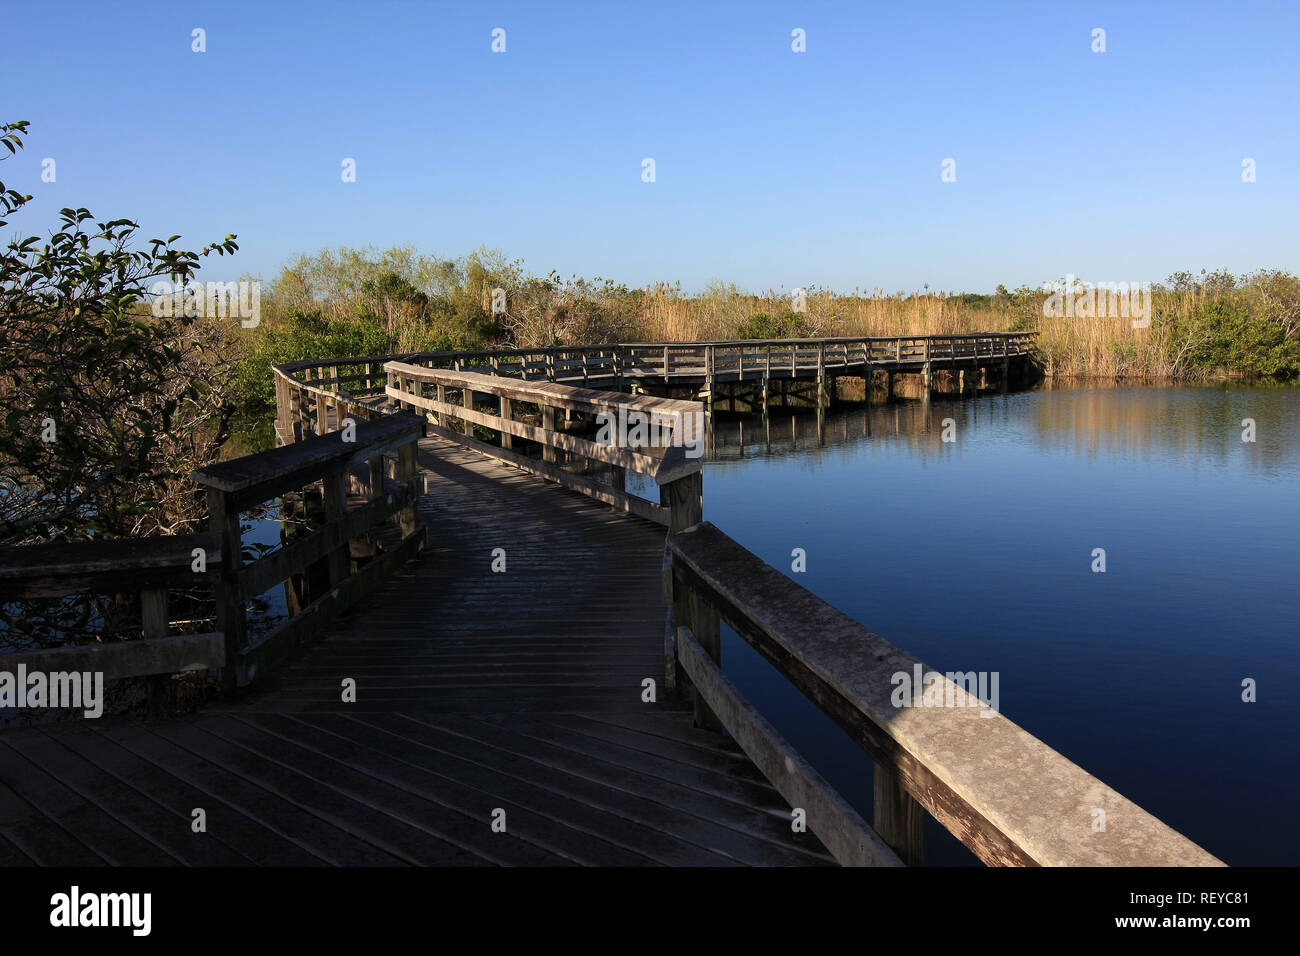 The Anhinga Trail boardwalk in Everglades National Park, Florida. Stock Photo